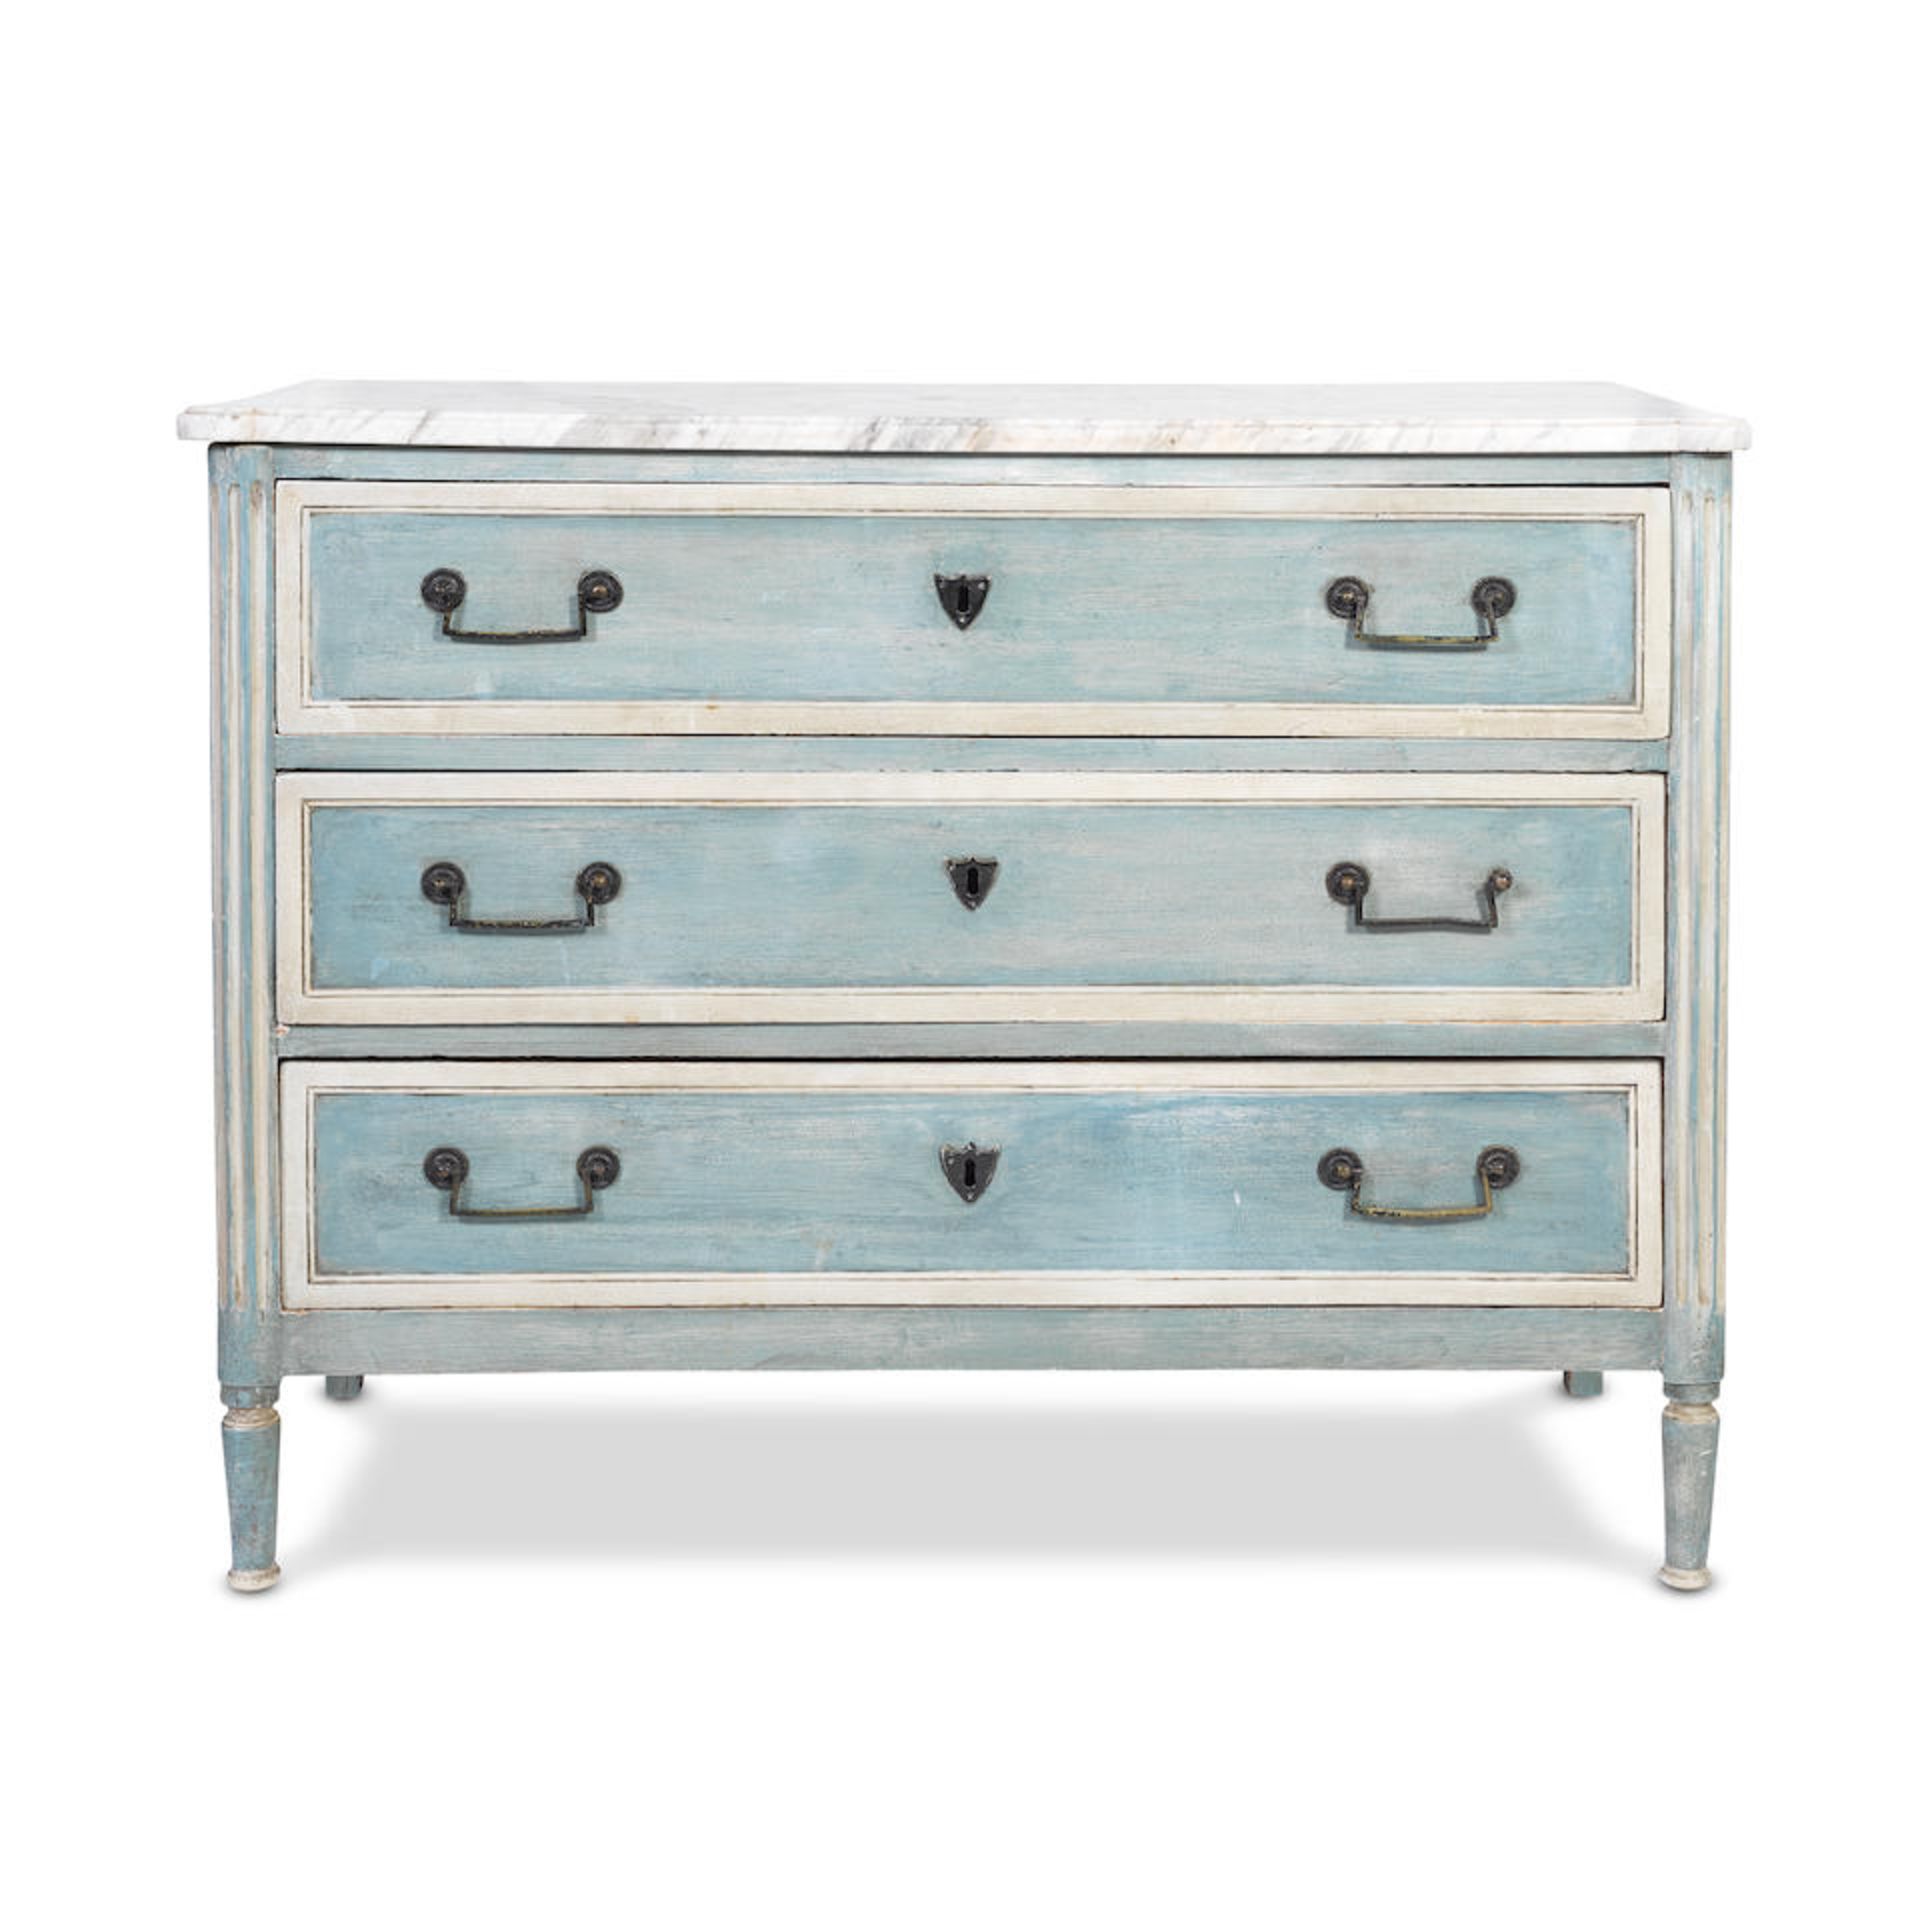 A 19th century and later blue painted commodeIn the Louis XVI style